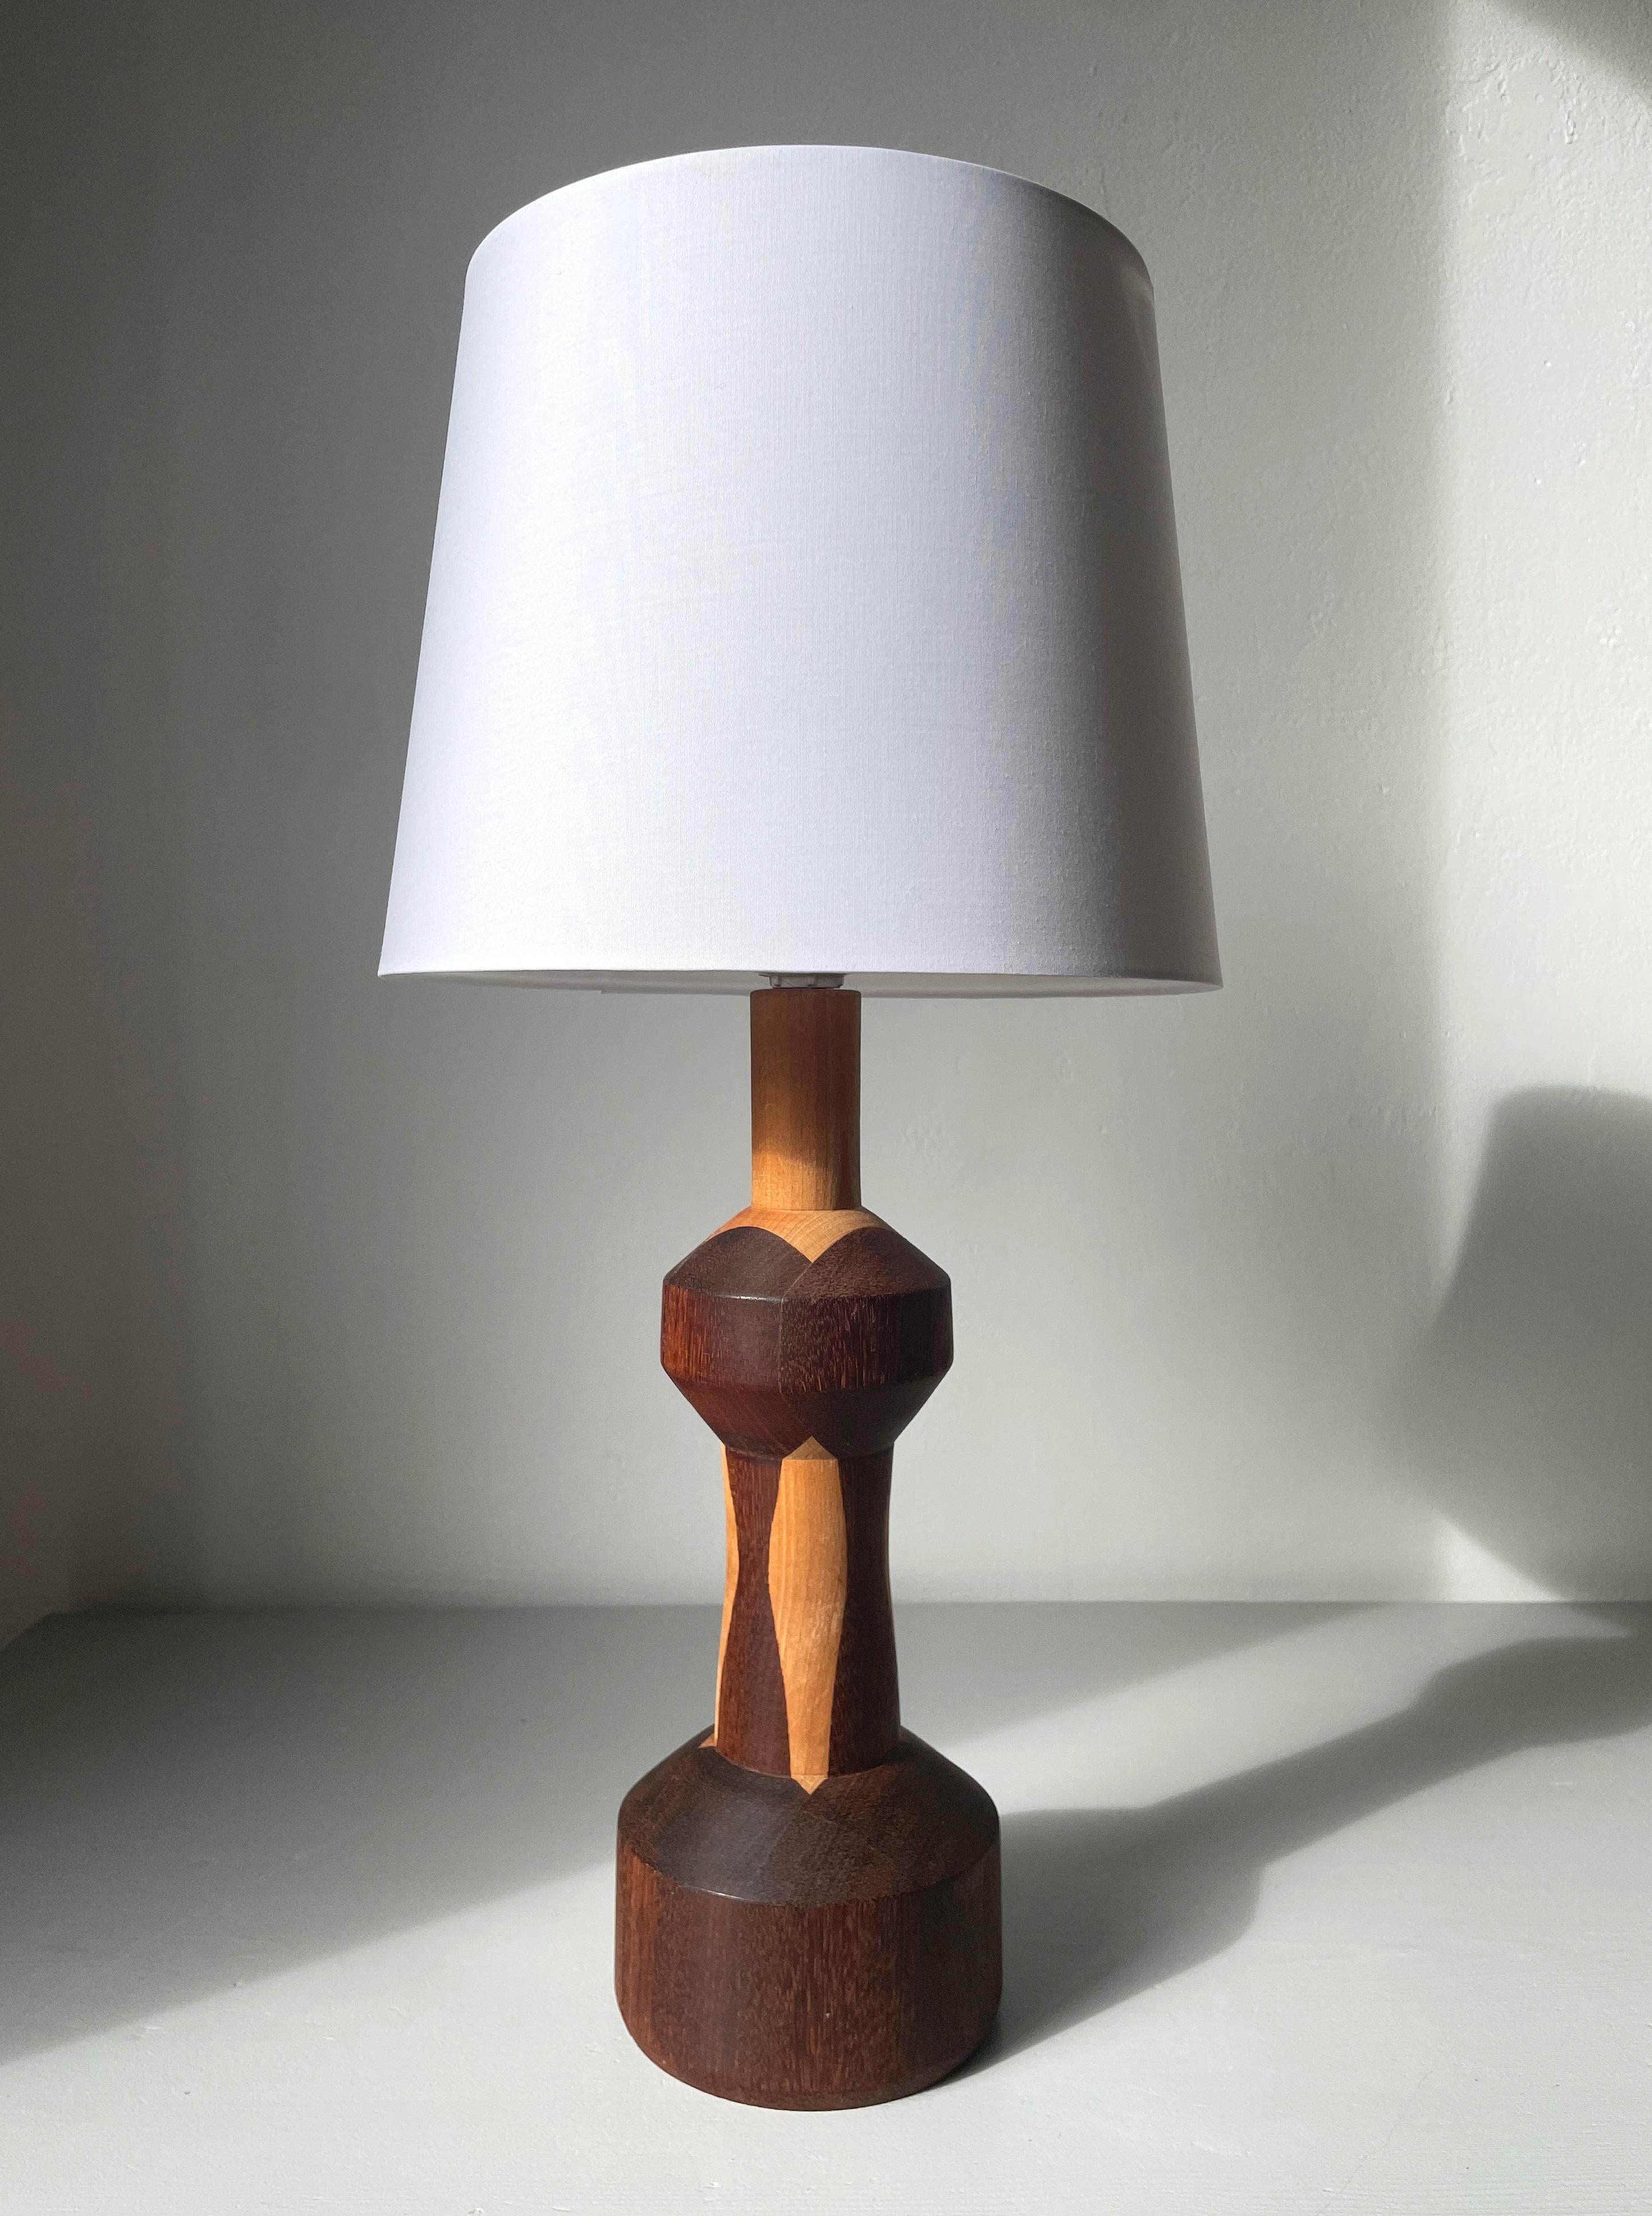 Hand-Crafted Handmade Swedish Wooden Table Lamp, 1970s For Sale